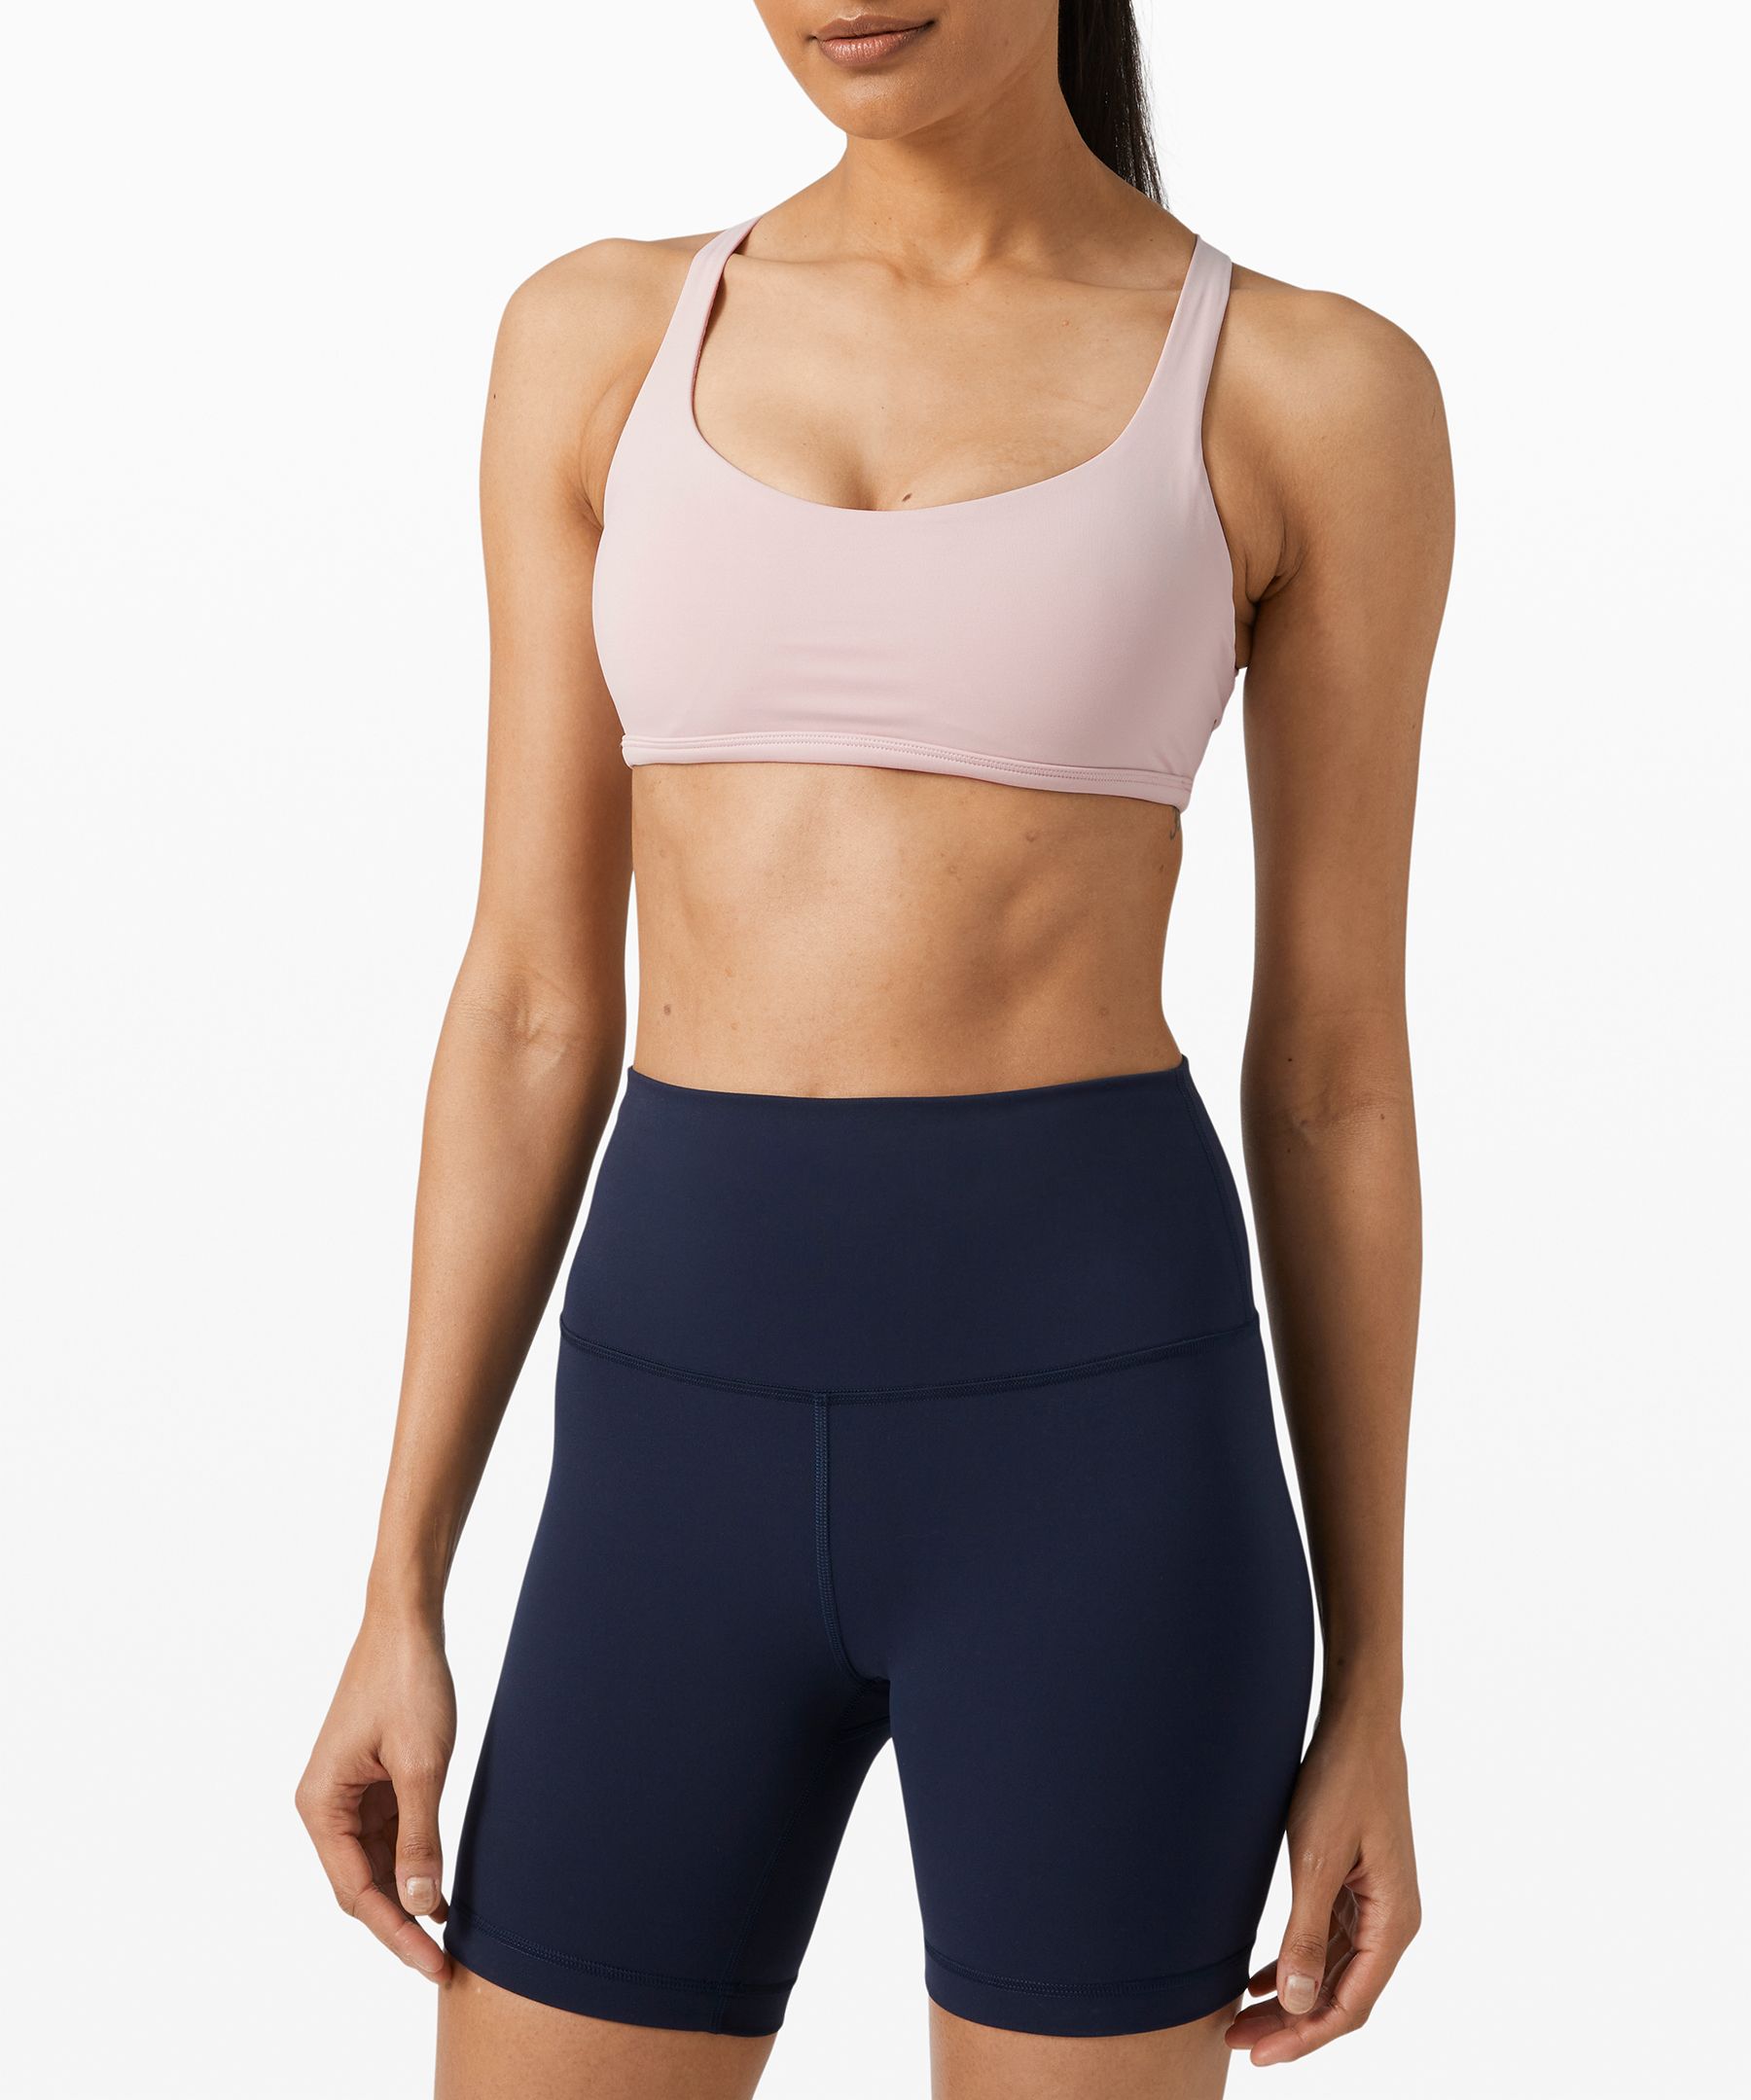 Lululemon Free To Be Bra Wild *Light Support, A/B Cup - Pink